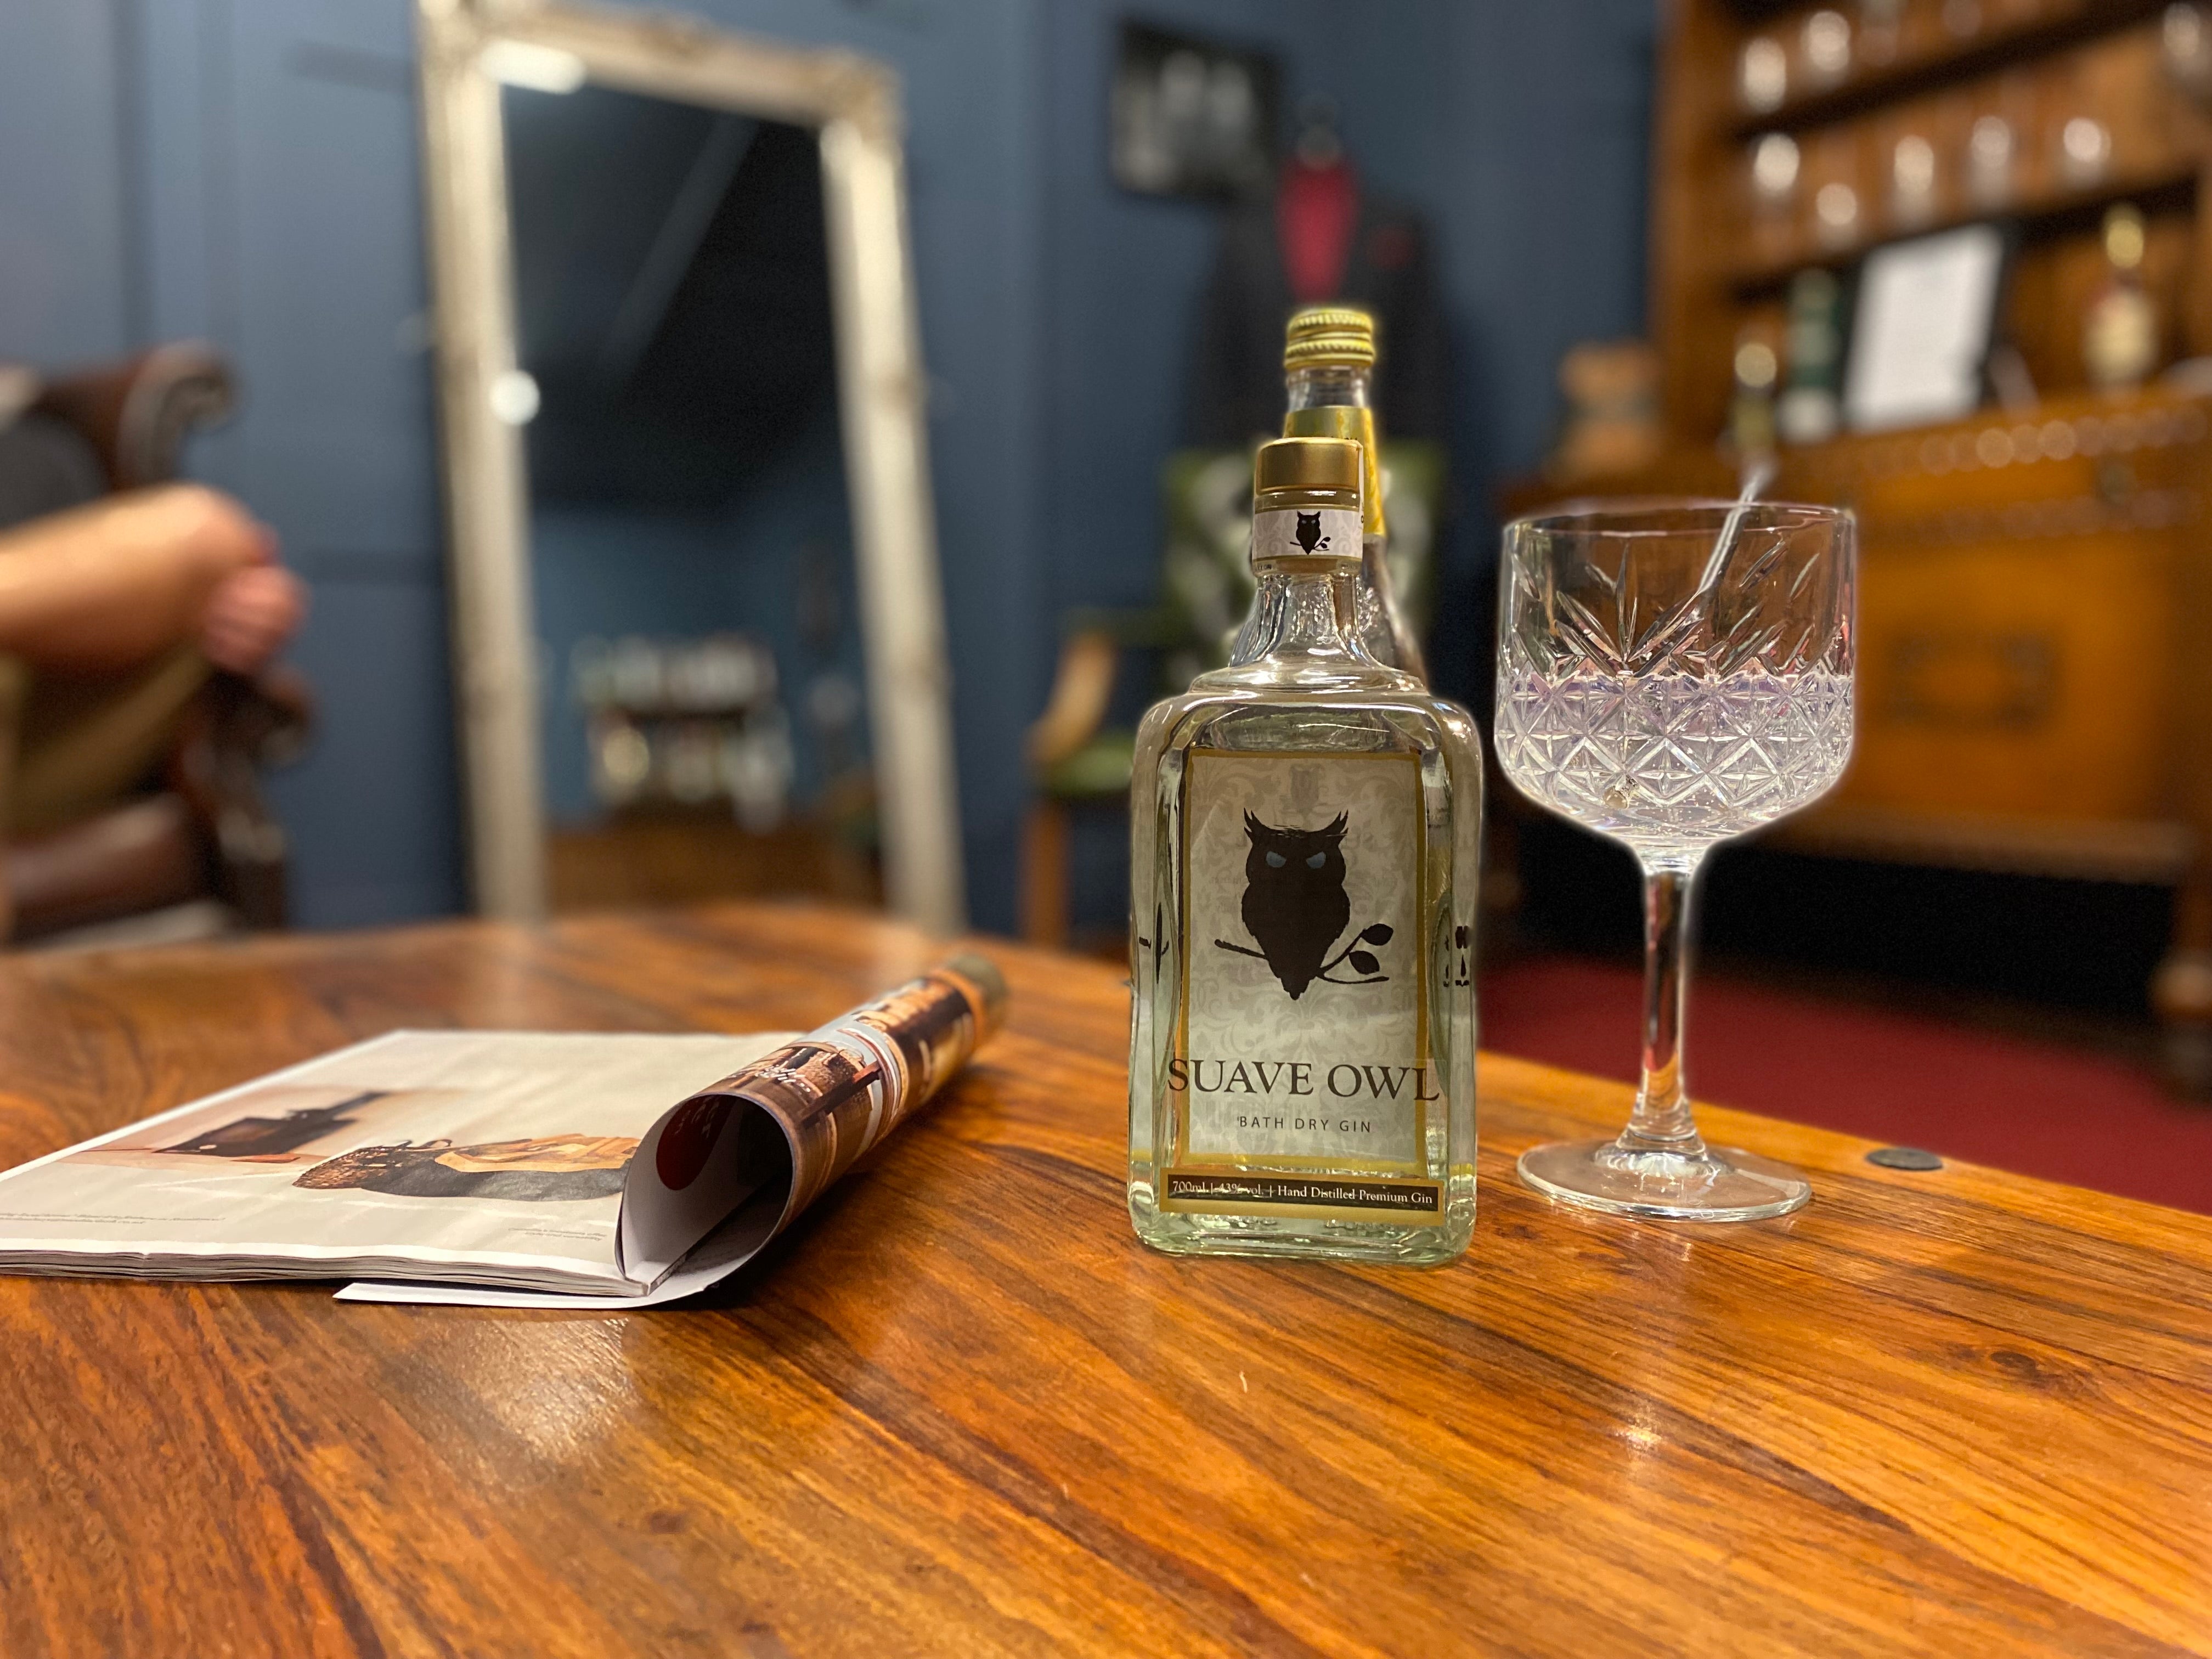 SUAVE OWL gin sits on a wooden table. There is a crystal glass with a paper straw. The room is finely decorated but slightly blurred in the background. 